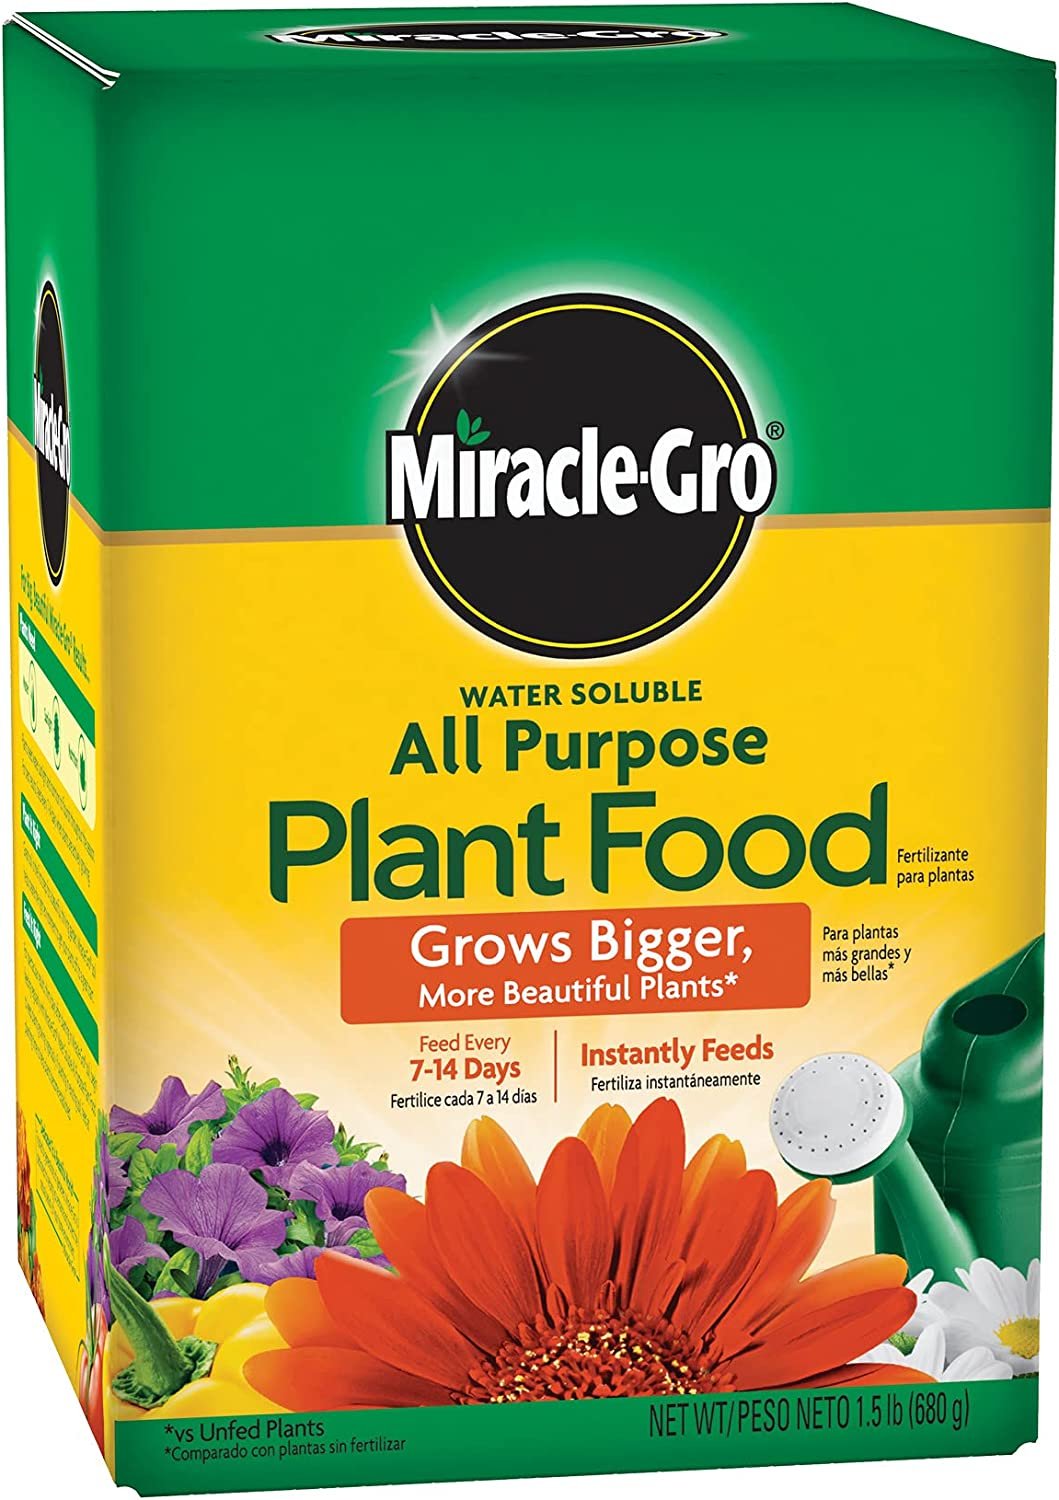 Miracle-Gro Water Soluble All Purpose Plant Food, 1.5 lbs.